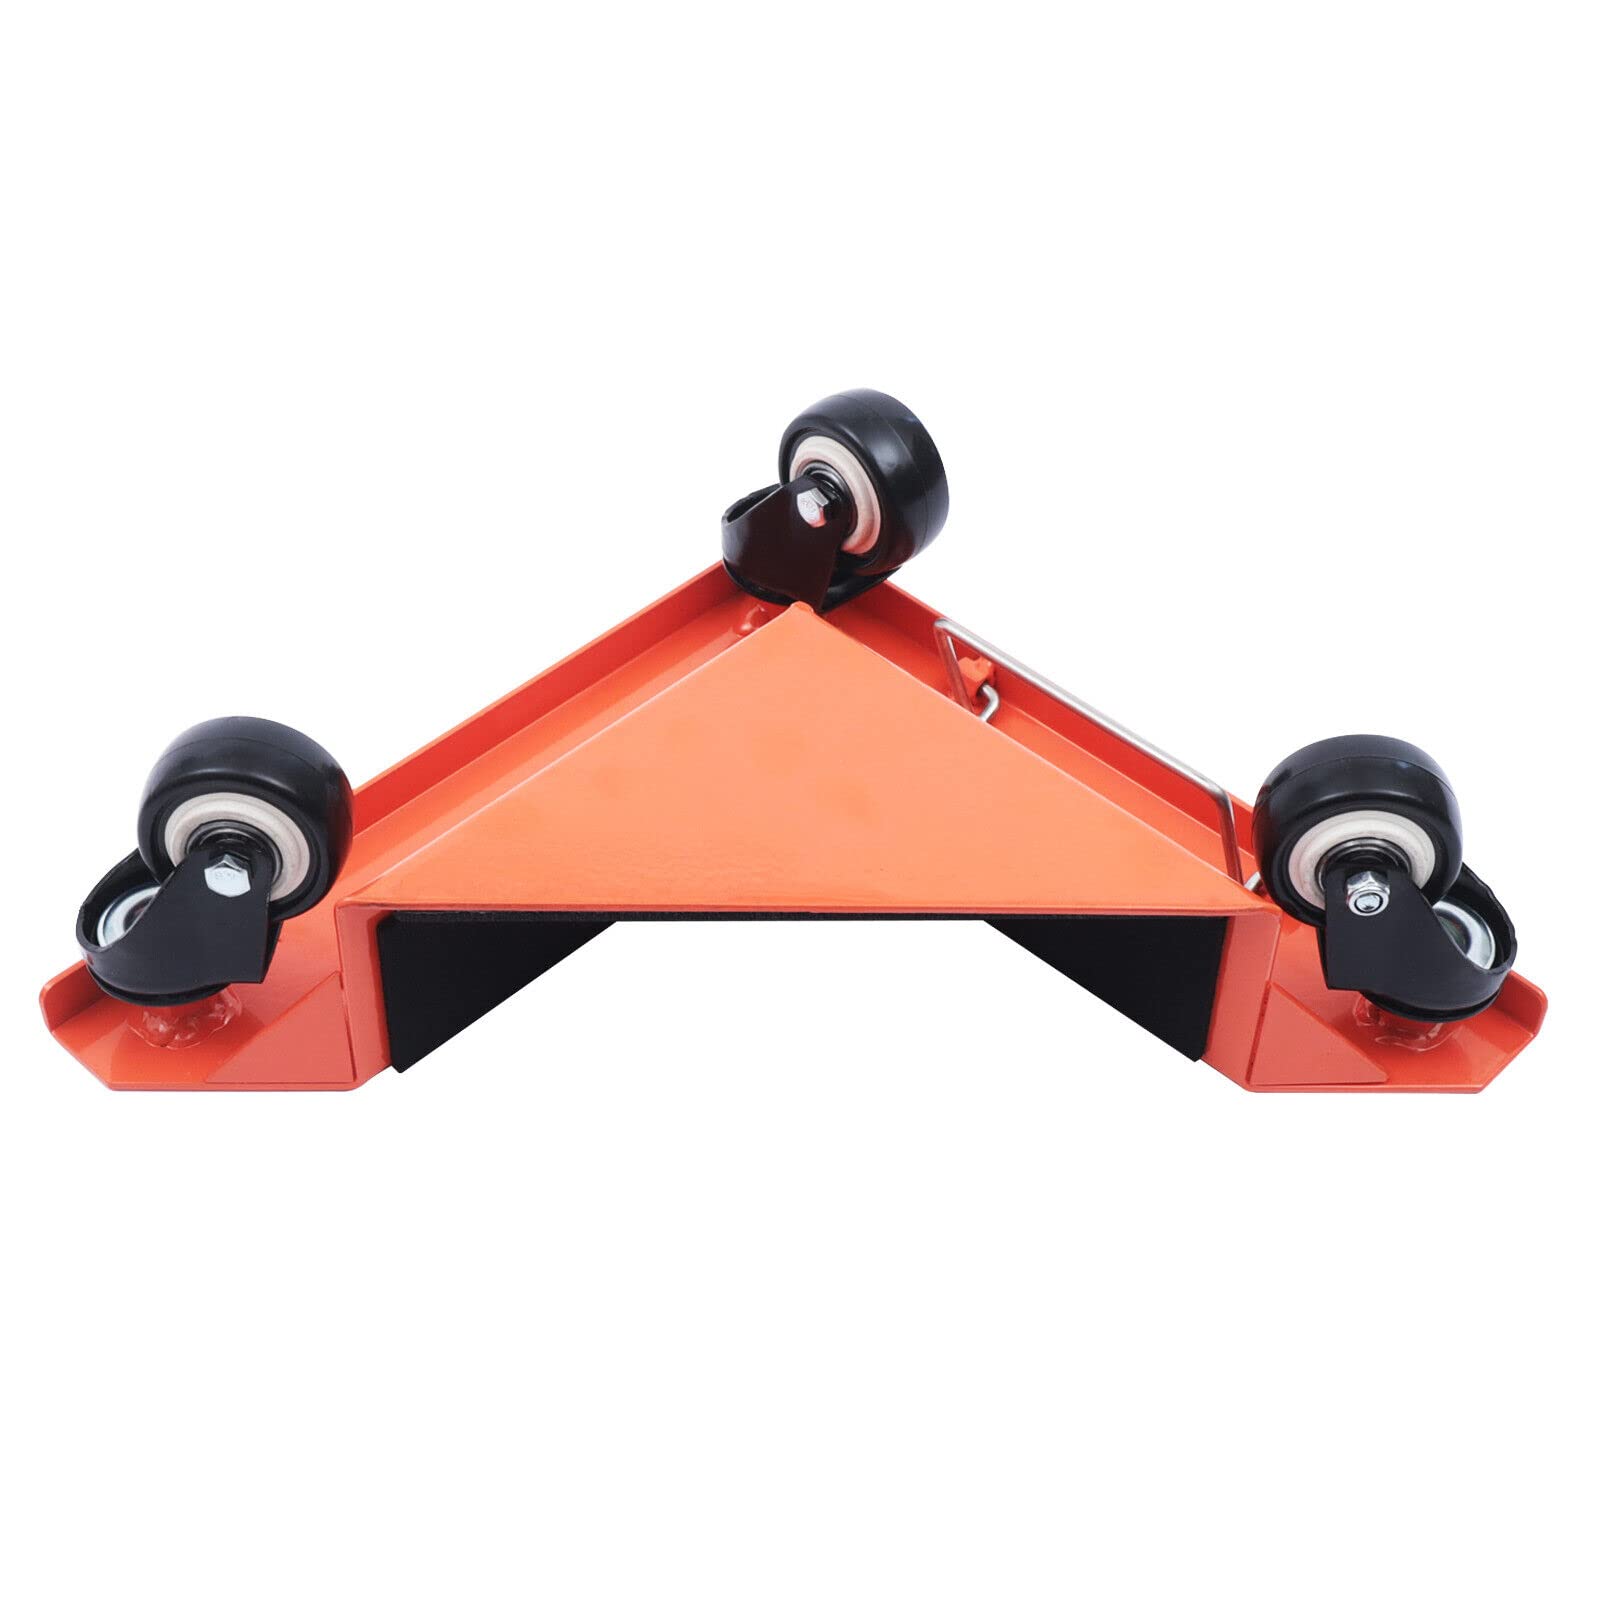 4 x 3 ruote Dolly Roller, 650 kg